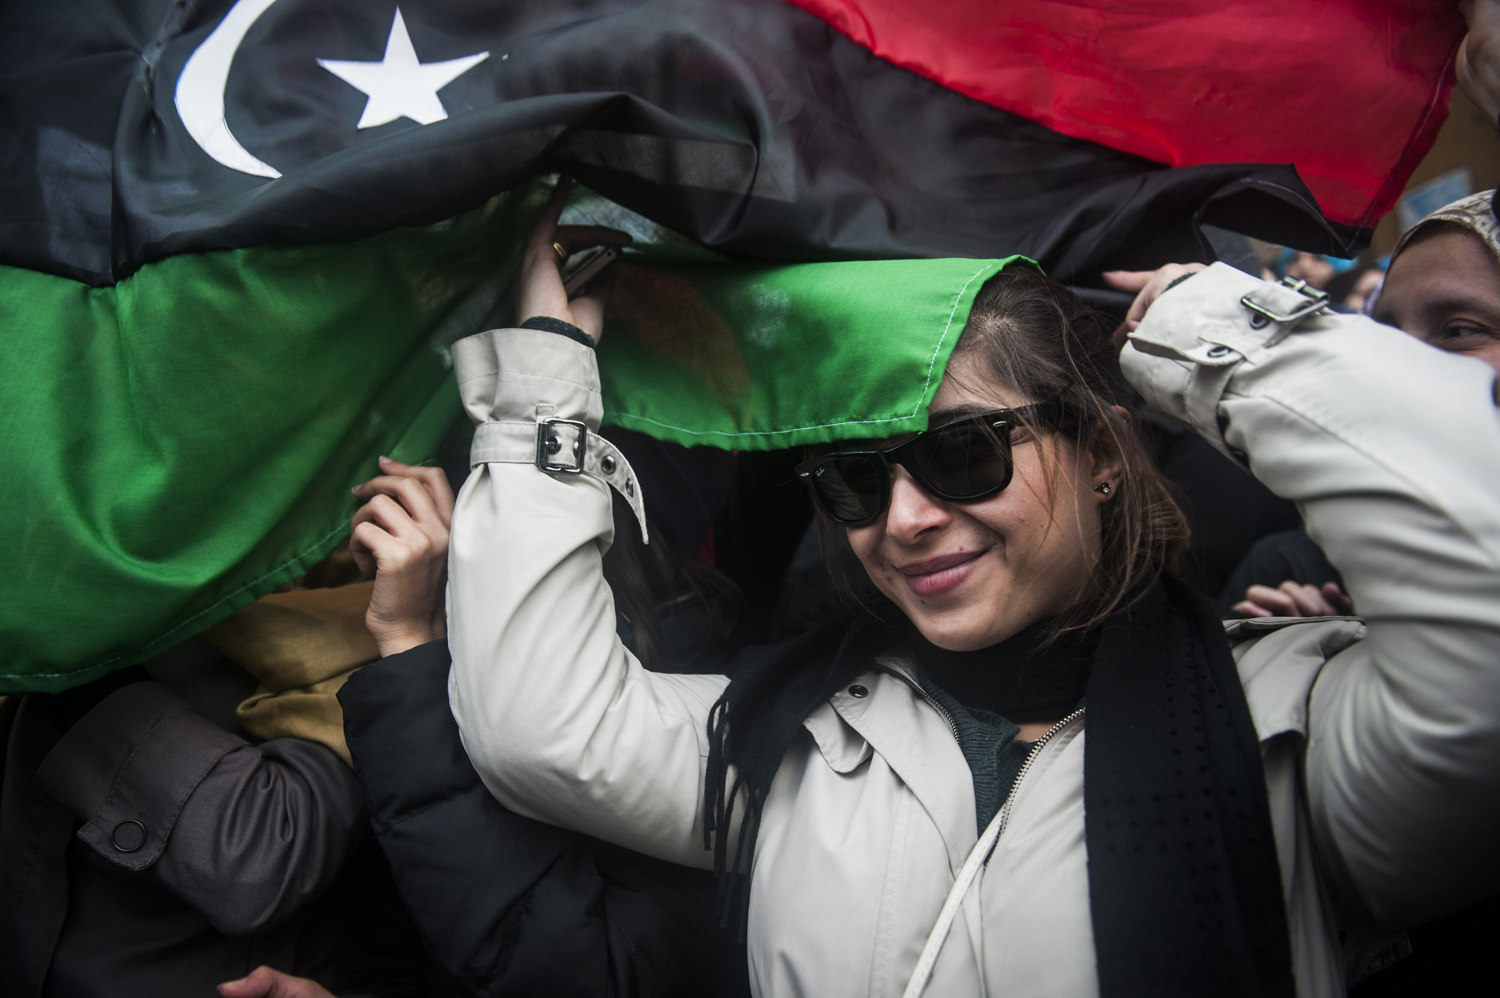  Libyans gather in the main square of Benghazi, Libya to celebrate the cities overthrow of Col. Gaddafi's 41 year rule. Cities in the east of Libya have all fallen to the resistance forces and efforts to sent up a temporary government are in action. 